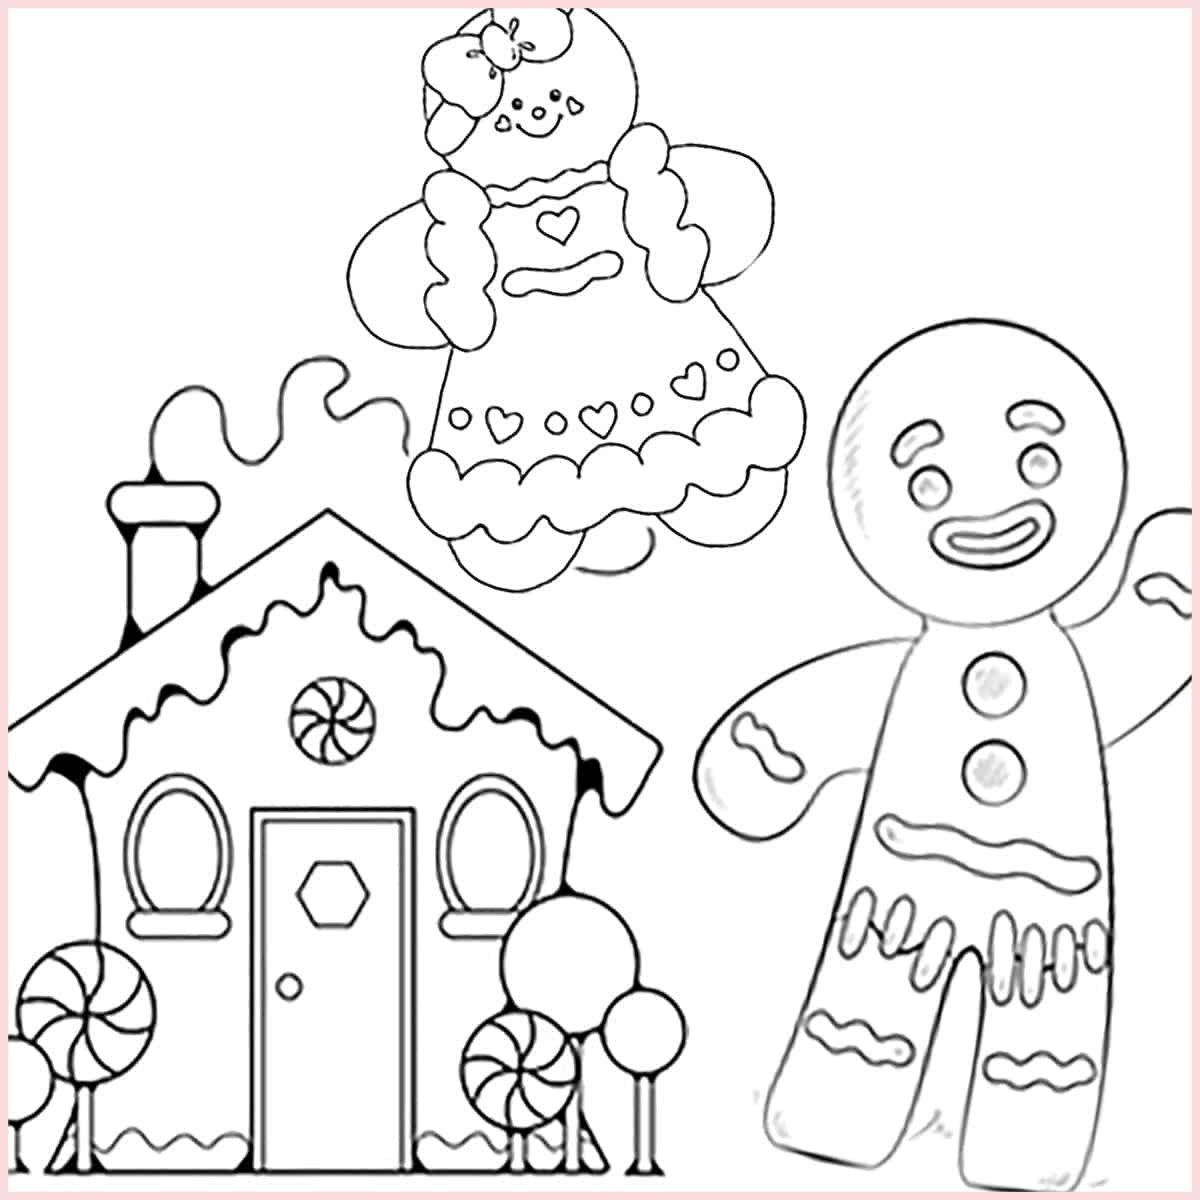 35 Gingerbread Man Coloring Pages (Free to Print)